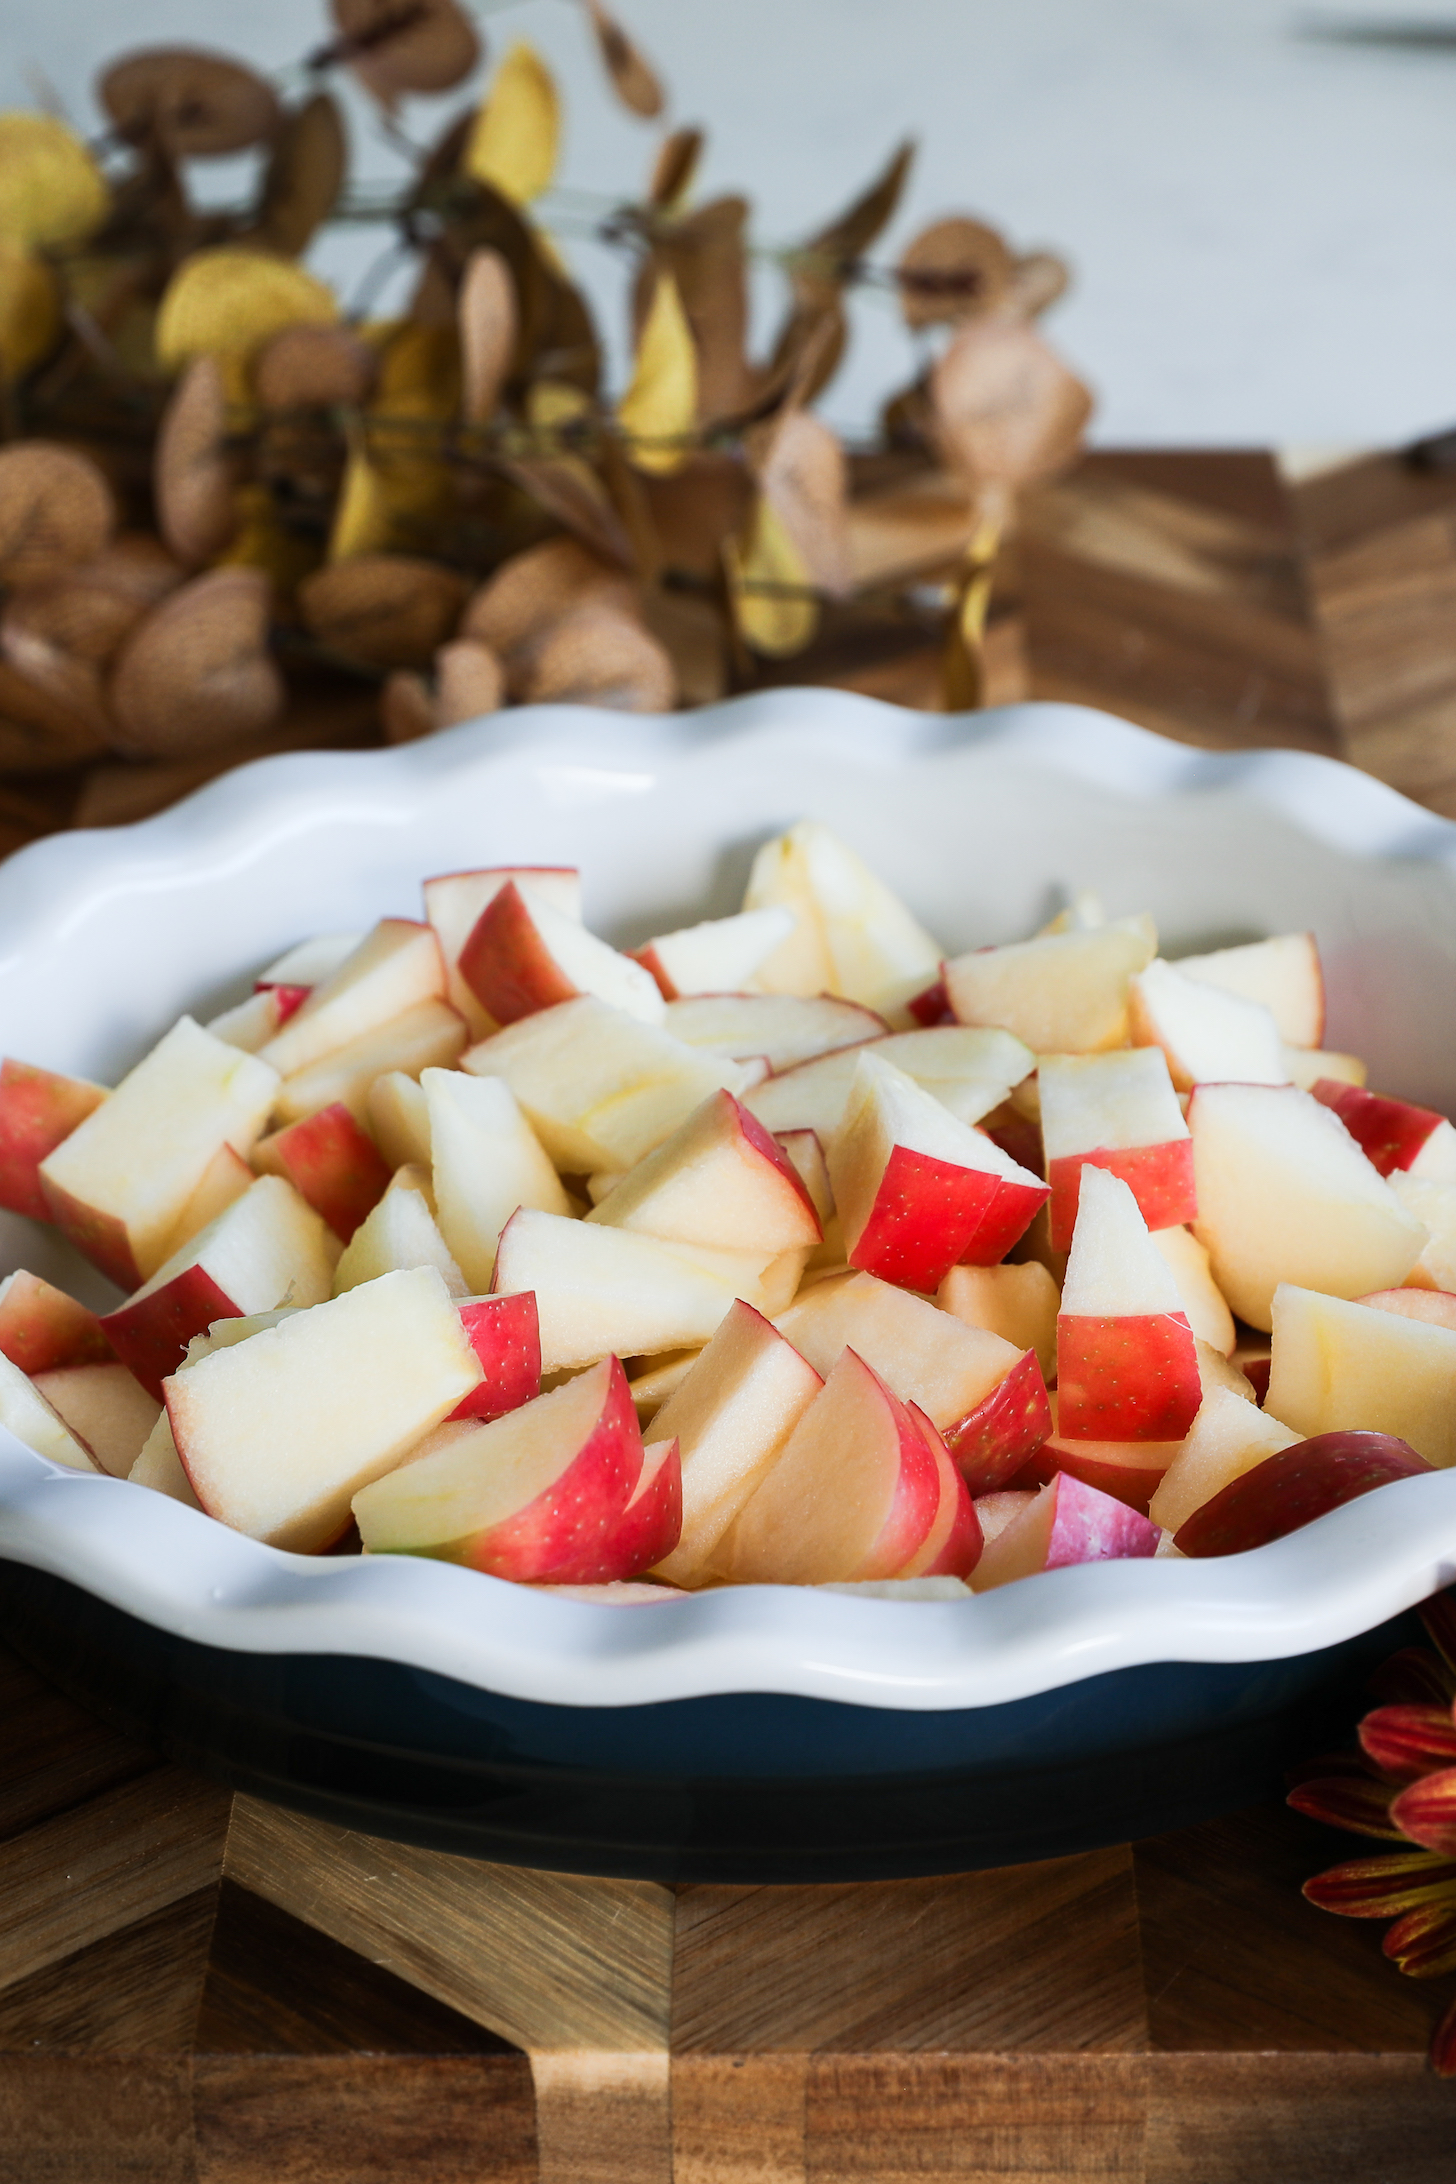 Oven dish with apple slices with flowers in the background.